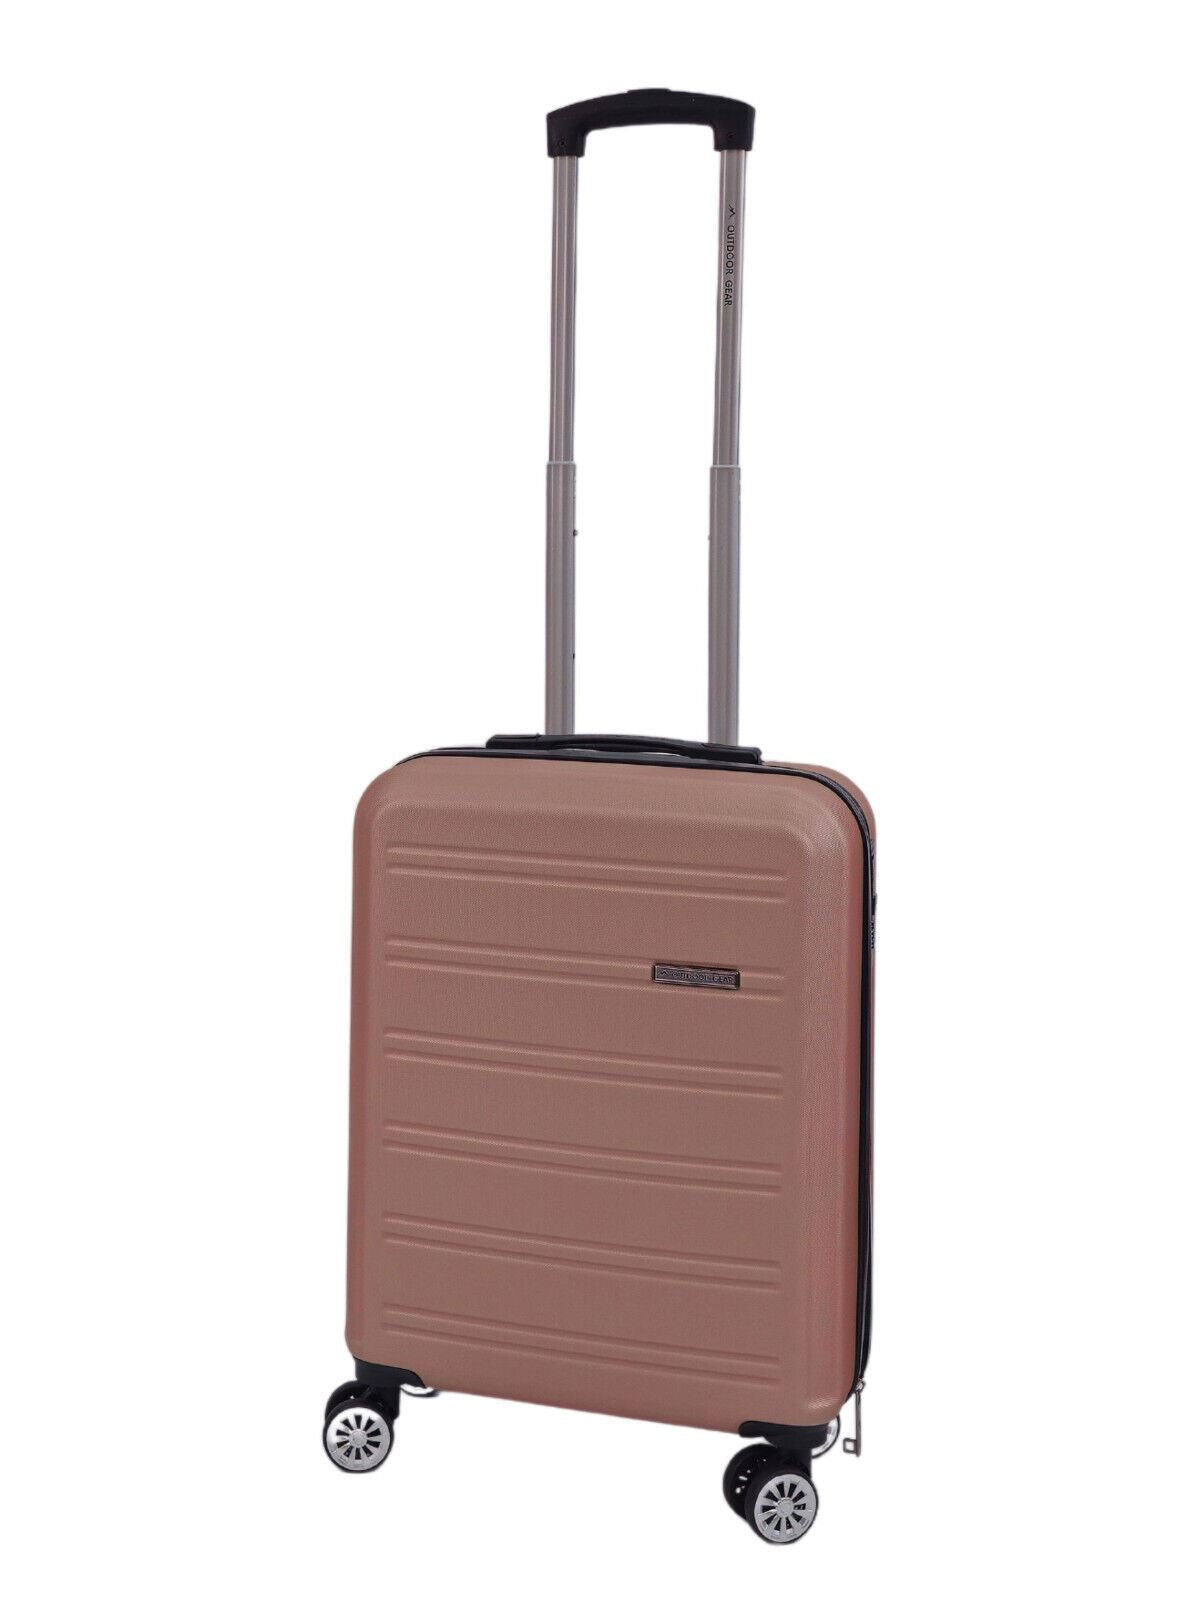 Hard Shell Cabin Luggage ABS Suitcase Set